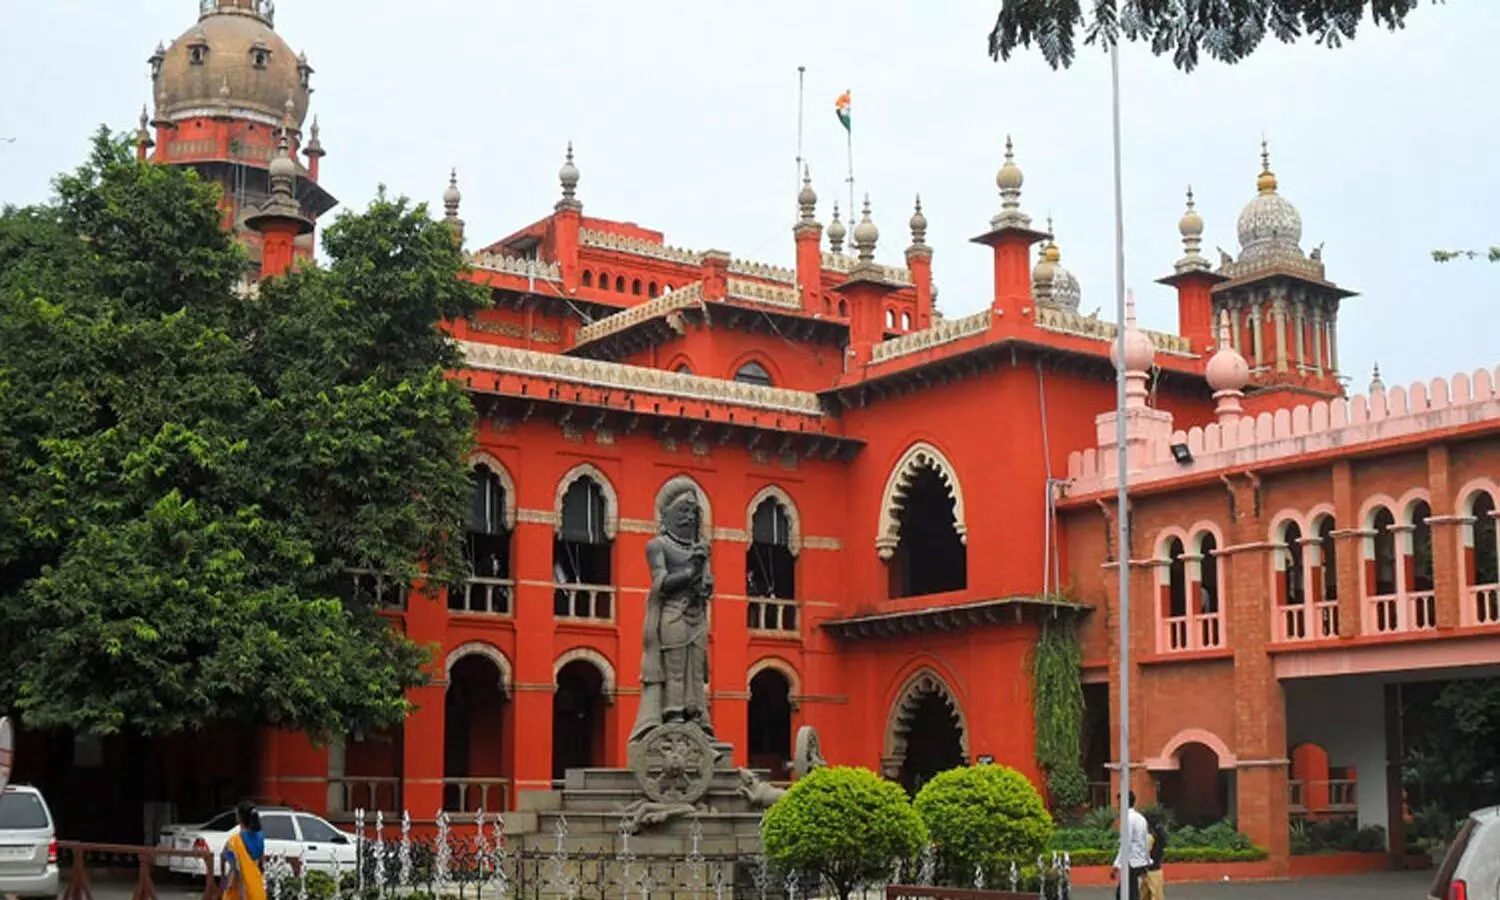 Reimburse Payments made by COVID patients at Private Hospitals: Madras HC to Puducherry Govt